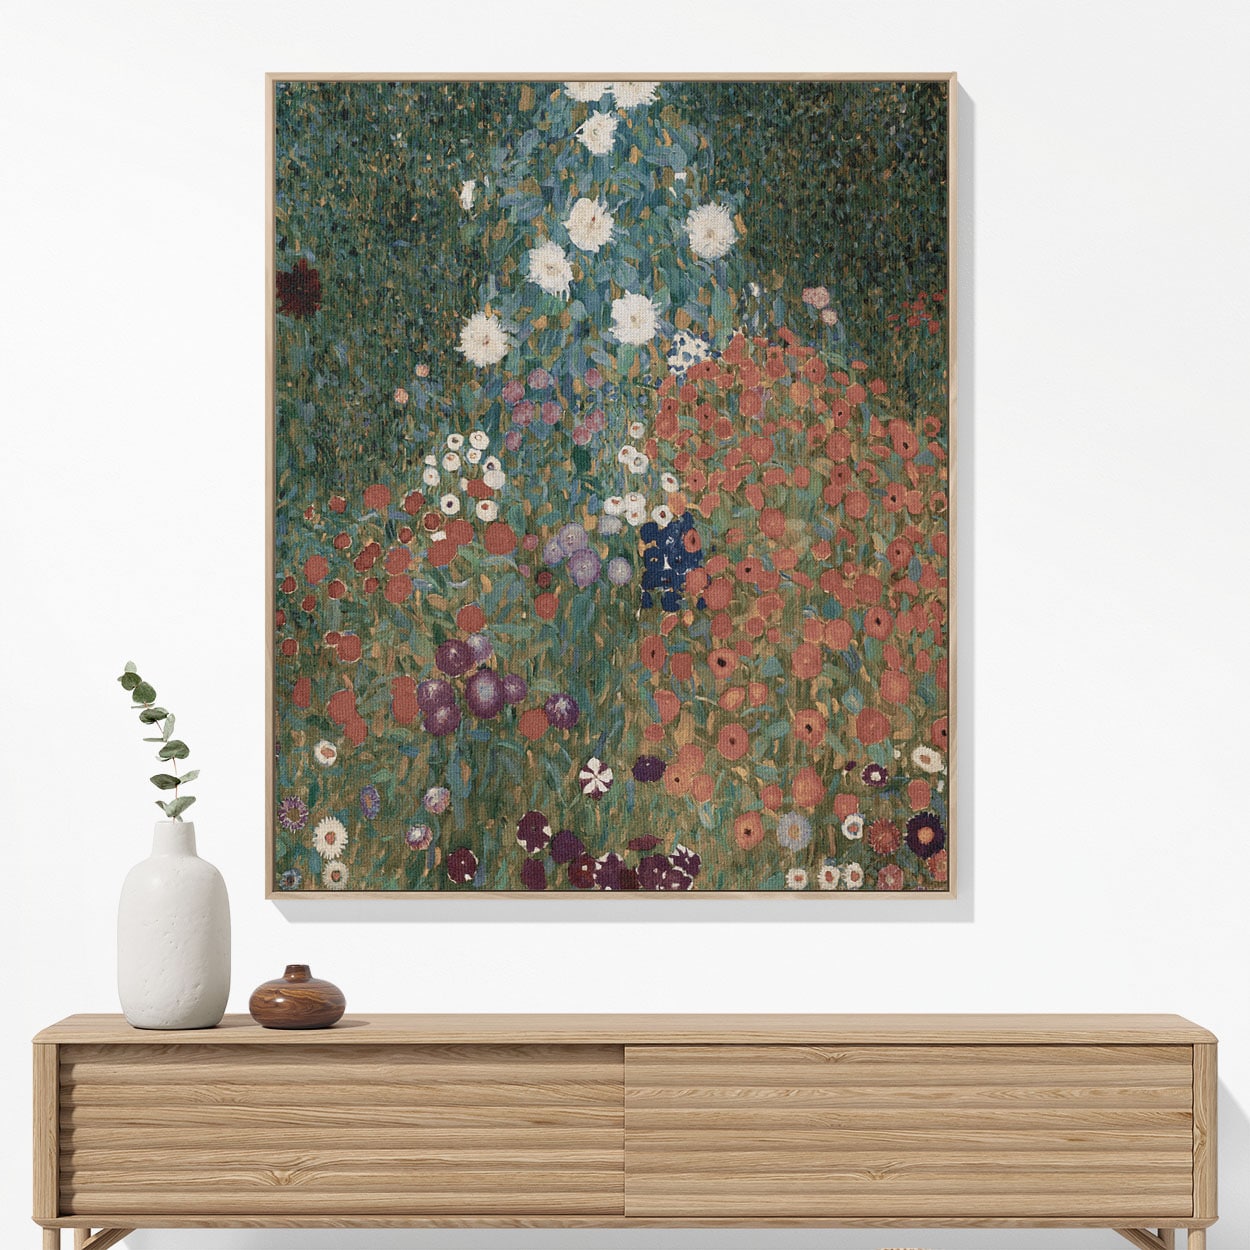 Beautiful Flowers Woven Blanket Woven Blanket Hanging on a Wall as Framed Wall Art